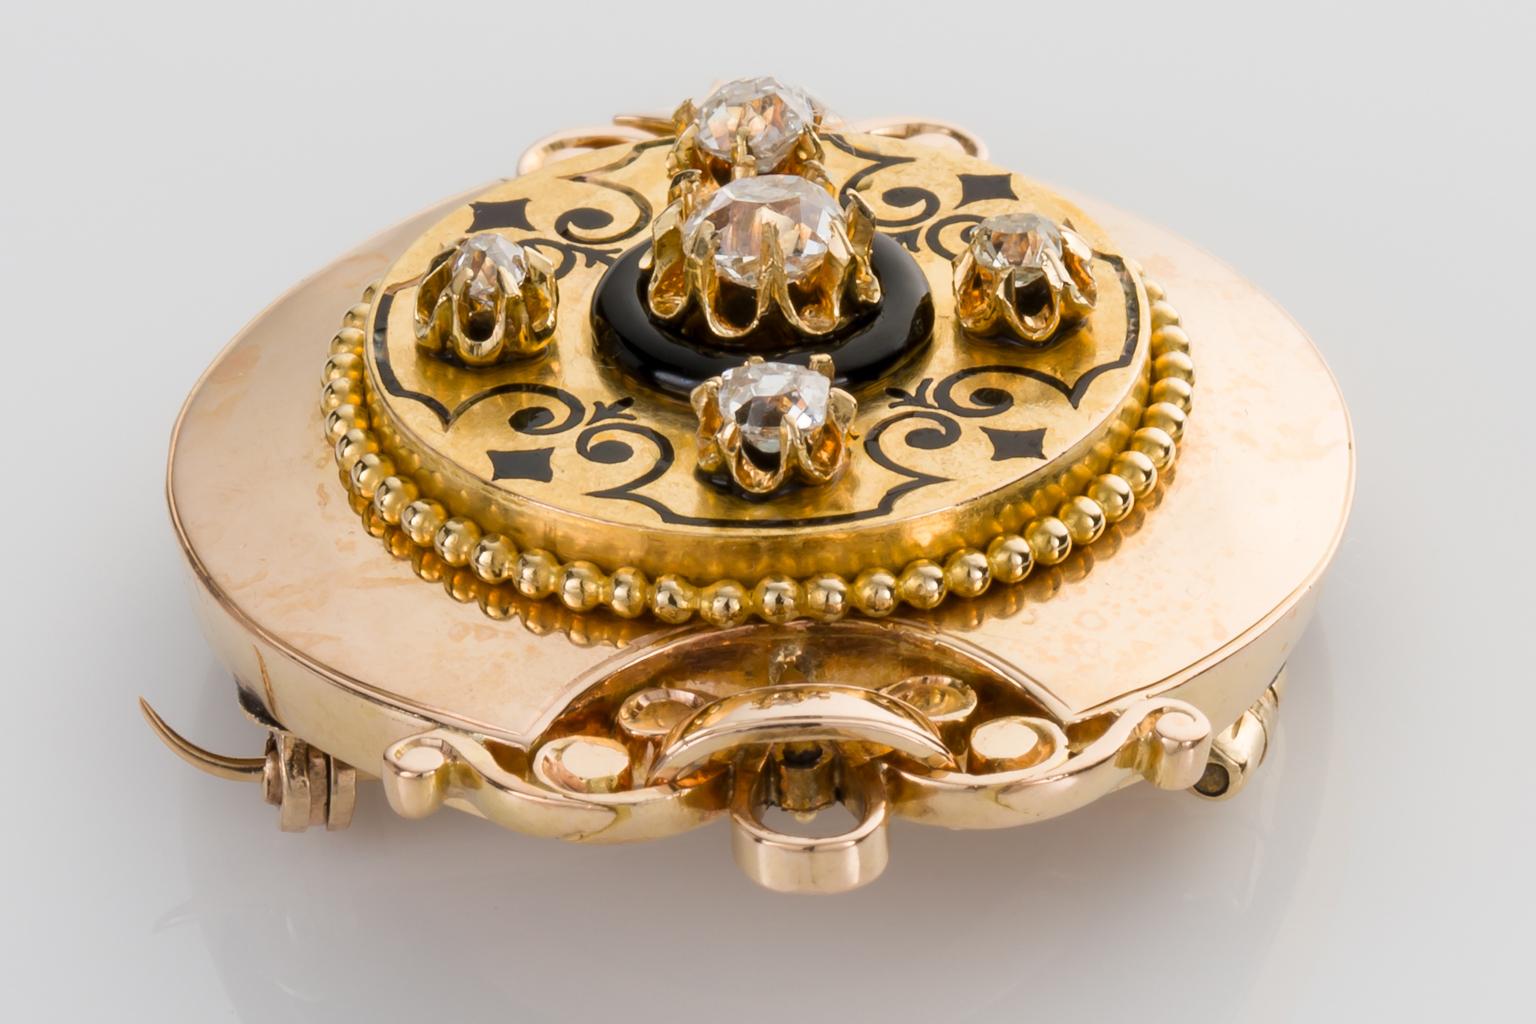 An ornate Victorian memory brooch set with bright old cushion cut diamonds weighing approximately 0.20cts claw set within detailed scalloped cups surrounded by black enamel scrollwork with the central diamond surrounded by an onyx ring. Detailed